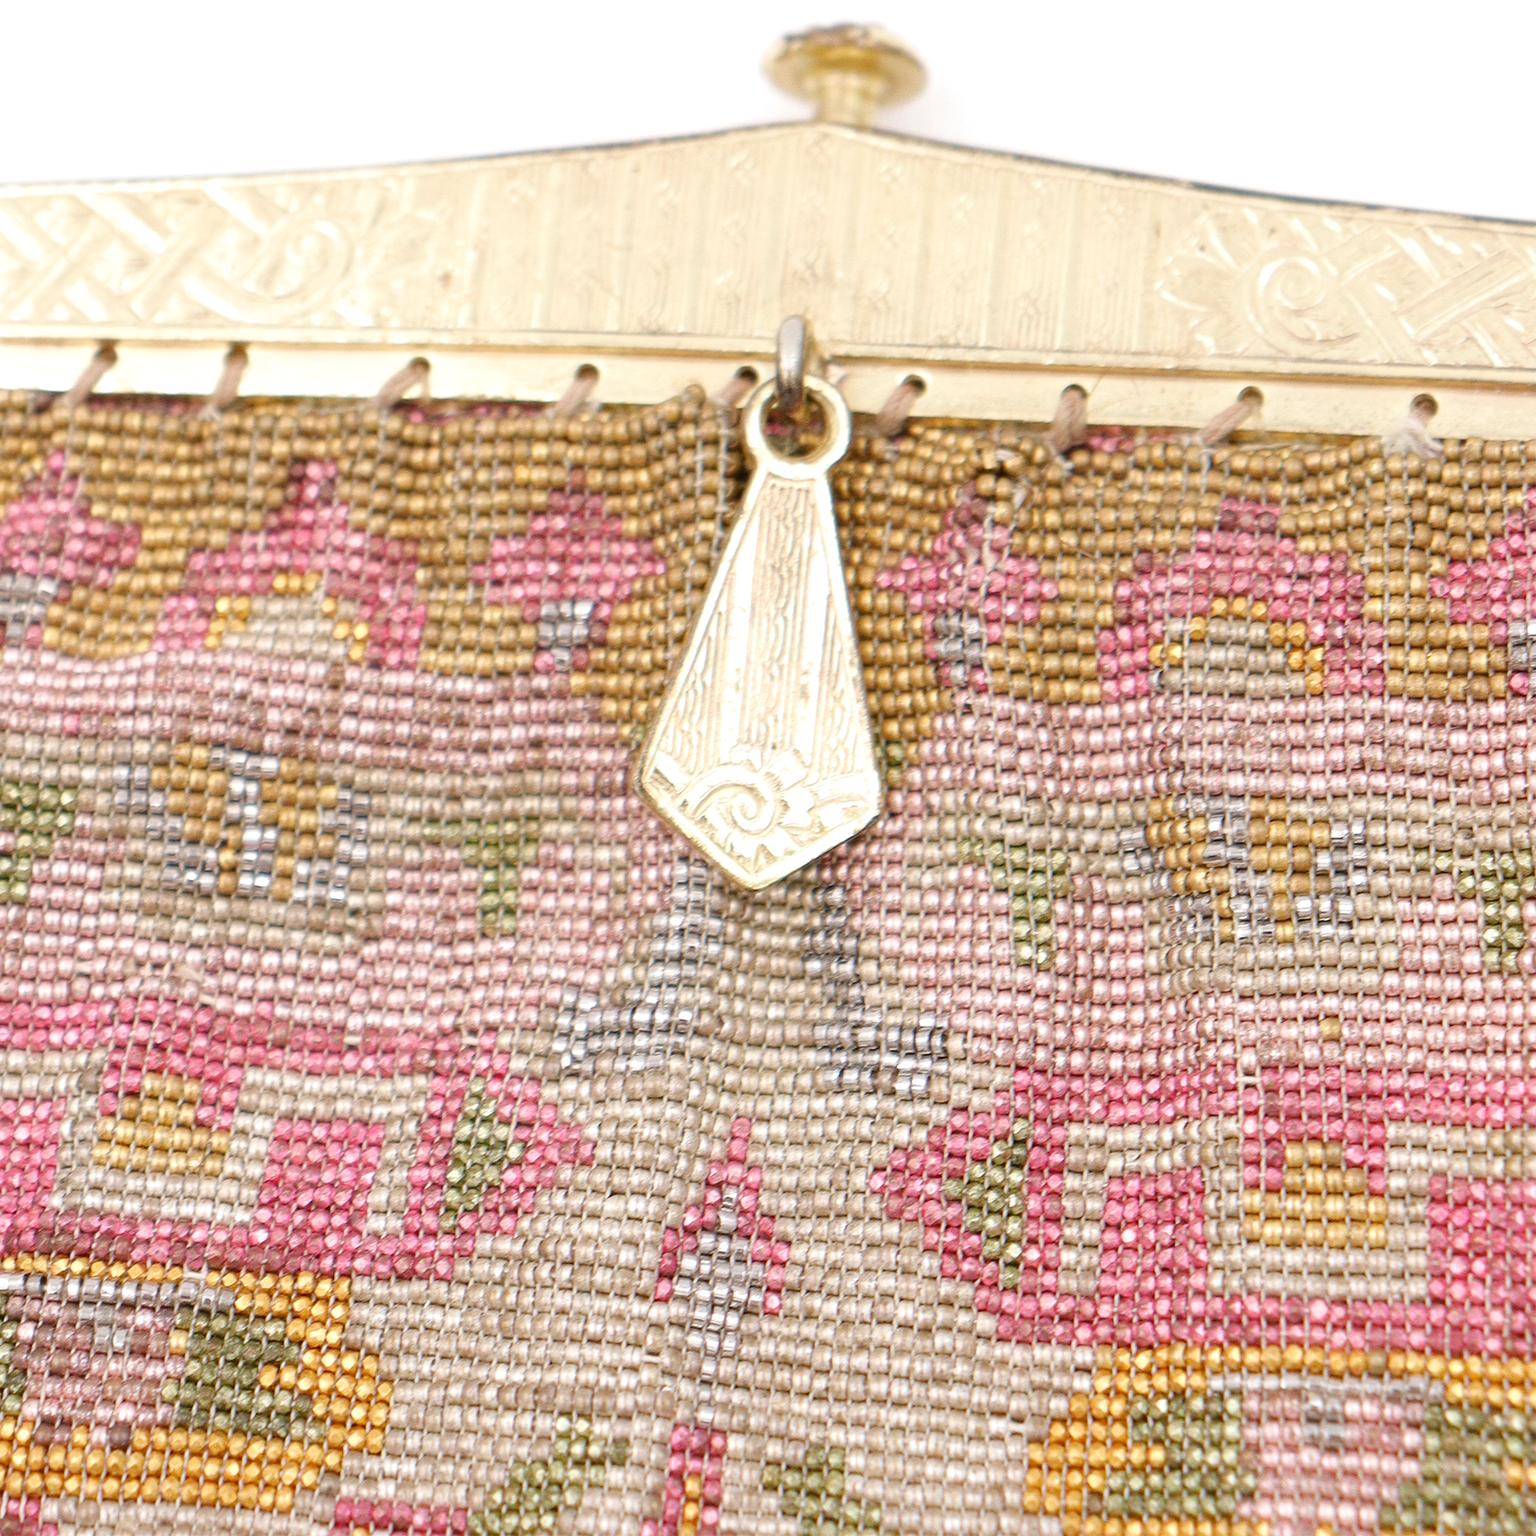 This 1910's antique handbag is such a beautiful example of a higher end finely beaded bag from that time period! This exquisite Edwardian evening bag is fully micro beaded with French cut steel beads in shades of gold, ivory, green and pink. The